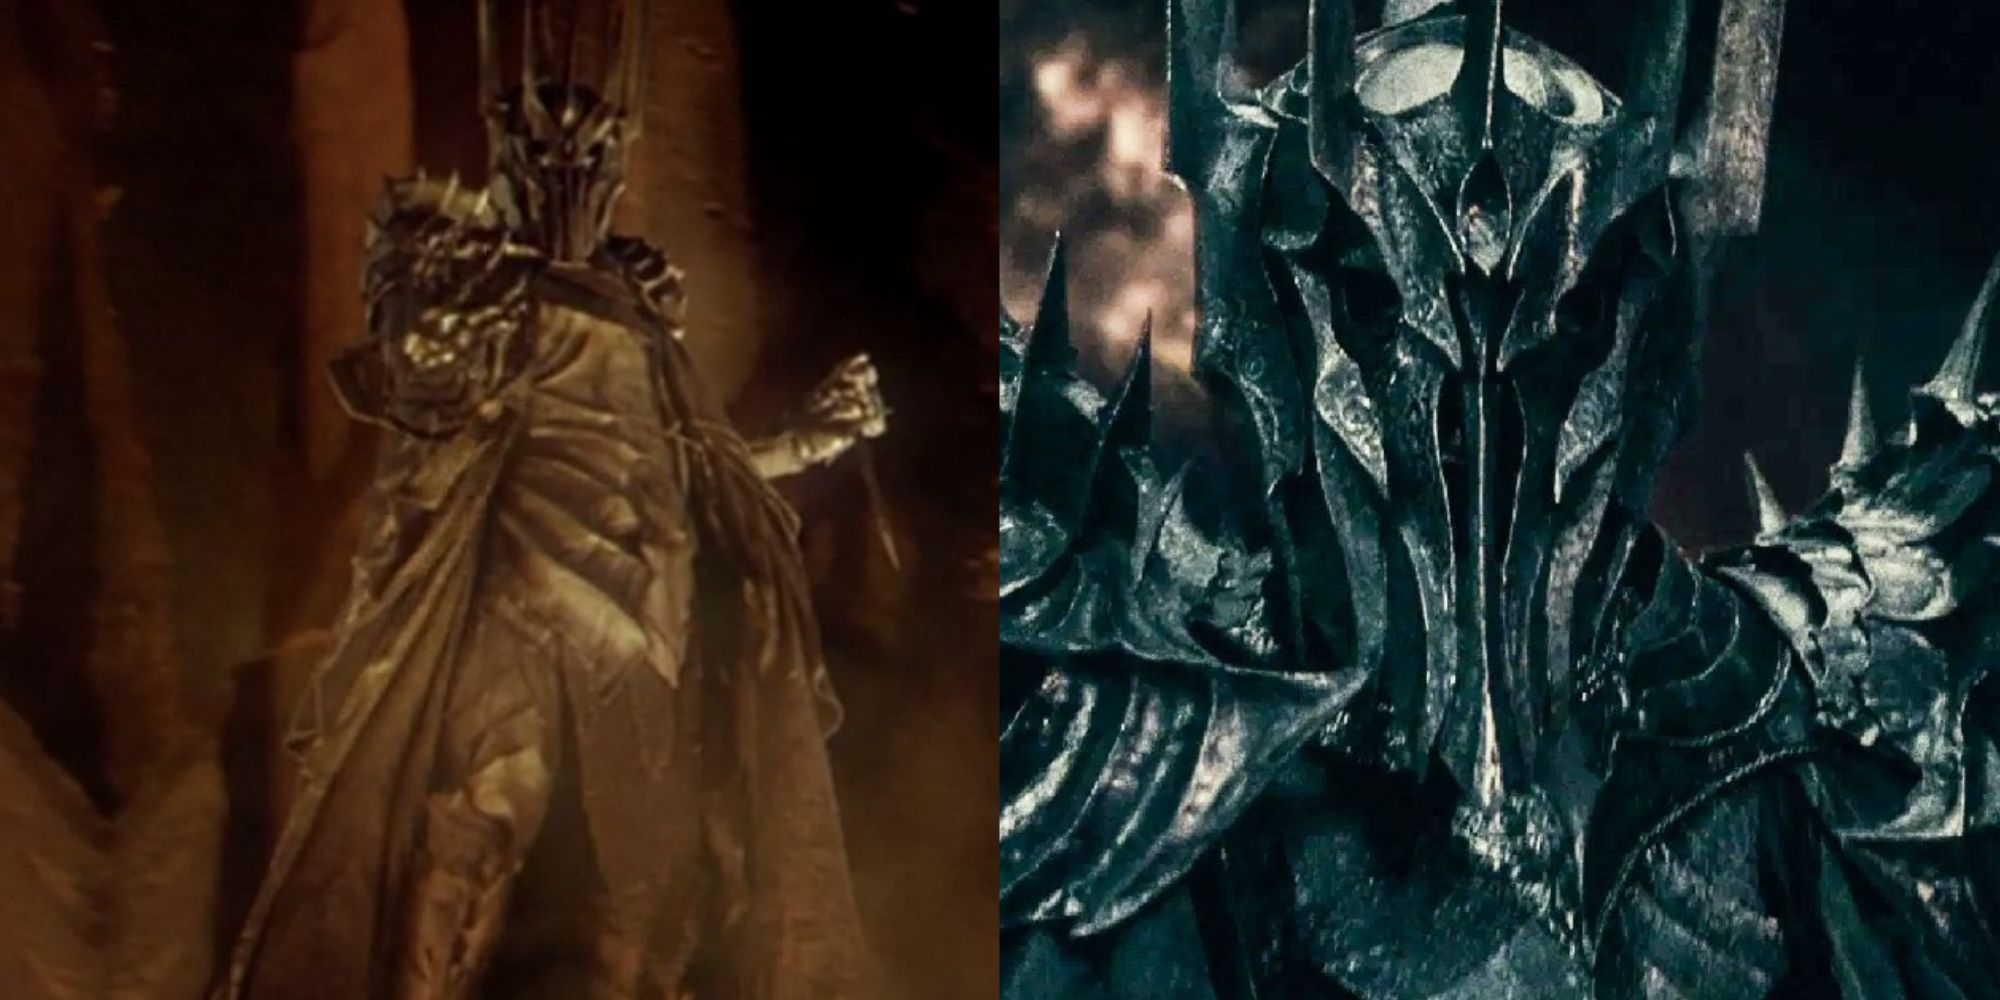 Splti image of Sauron in the Lord of the Rings movies